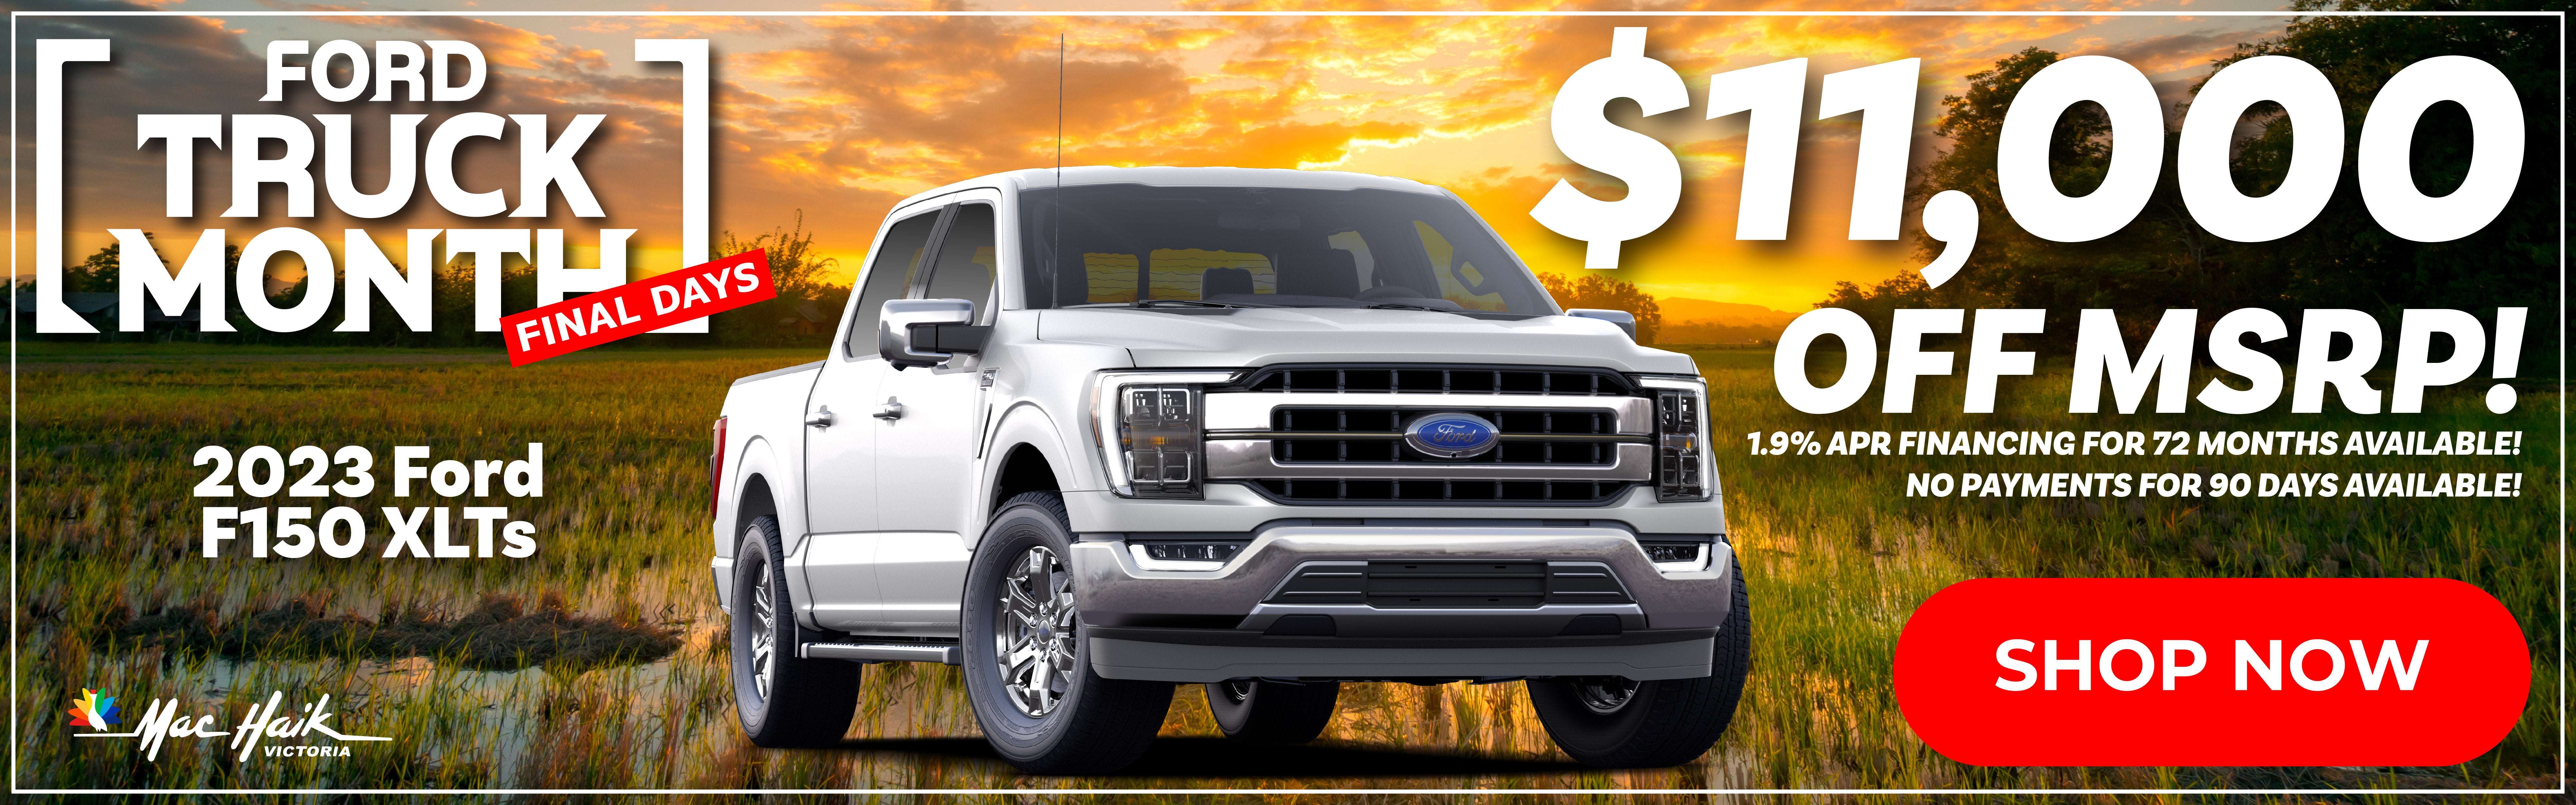 2023 Ford F150 XLTs